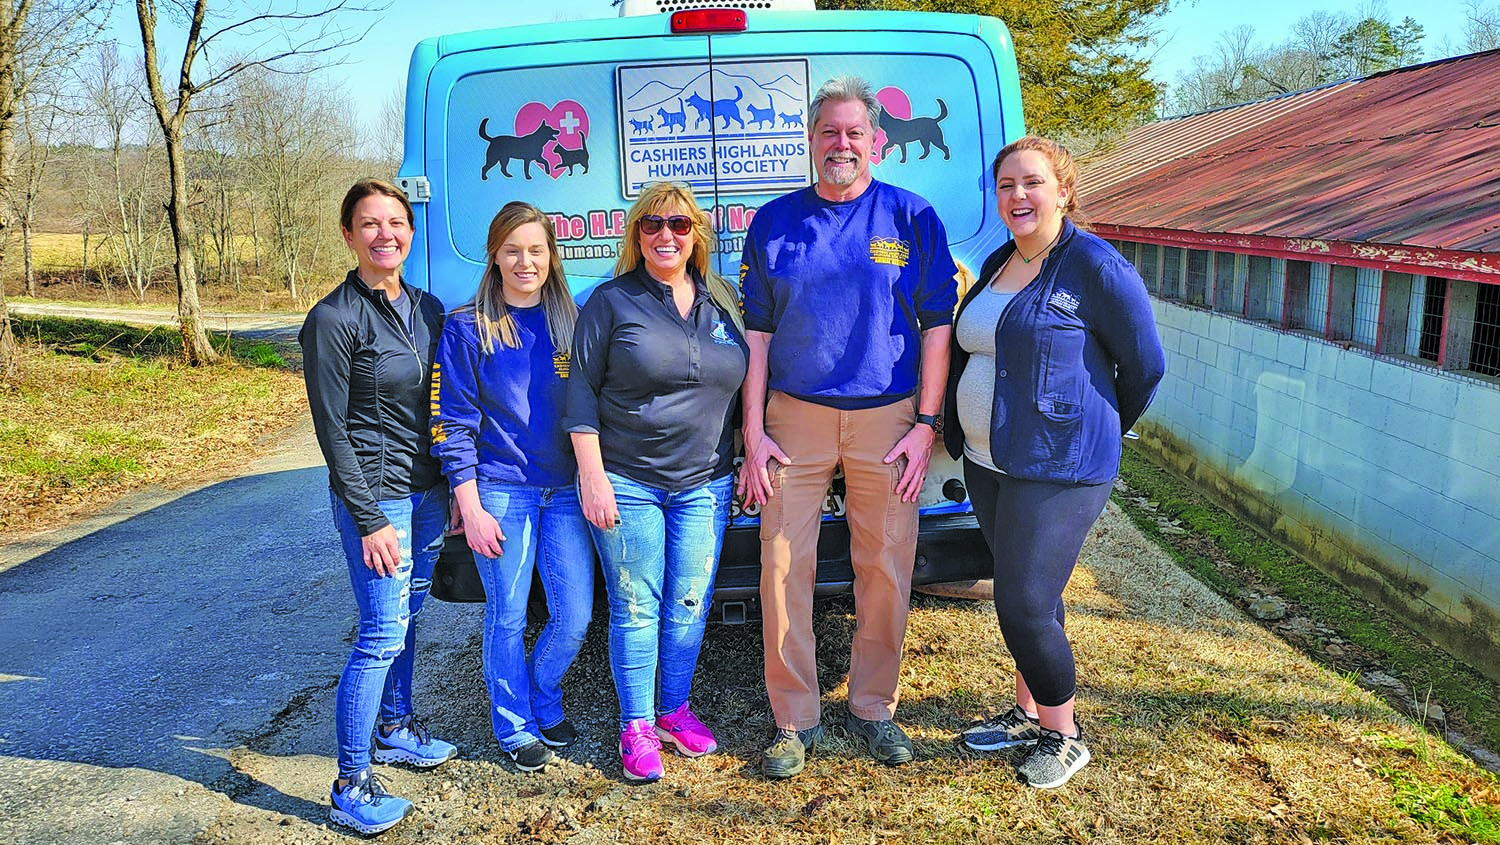 (L-R) Anderson County PAWS Director & Veterinarian Dr. Kim Sanders, CHHS Assistant Manager Jodi Henkel, PAWS Bryson City Executive Director Beth Stroud, CHHS Executive Director David Stroud, CHHS Shelter Manager Kaitlyn Moss Villarreal